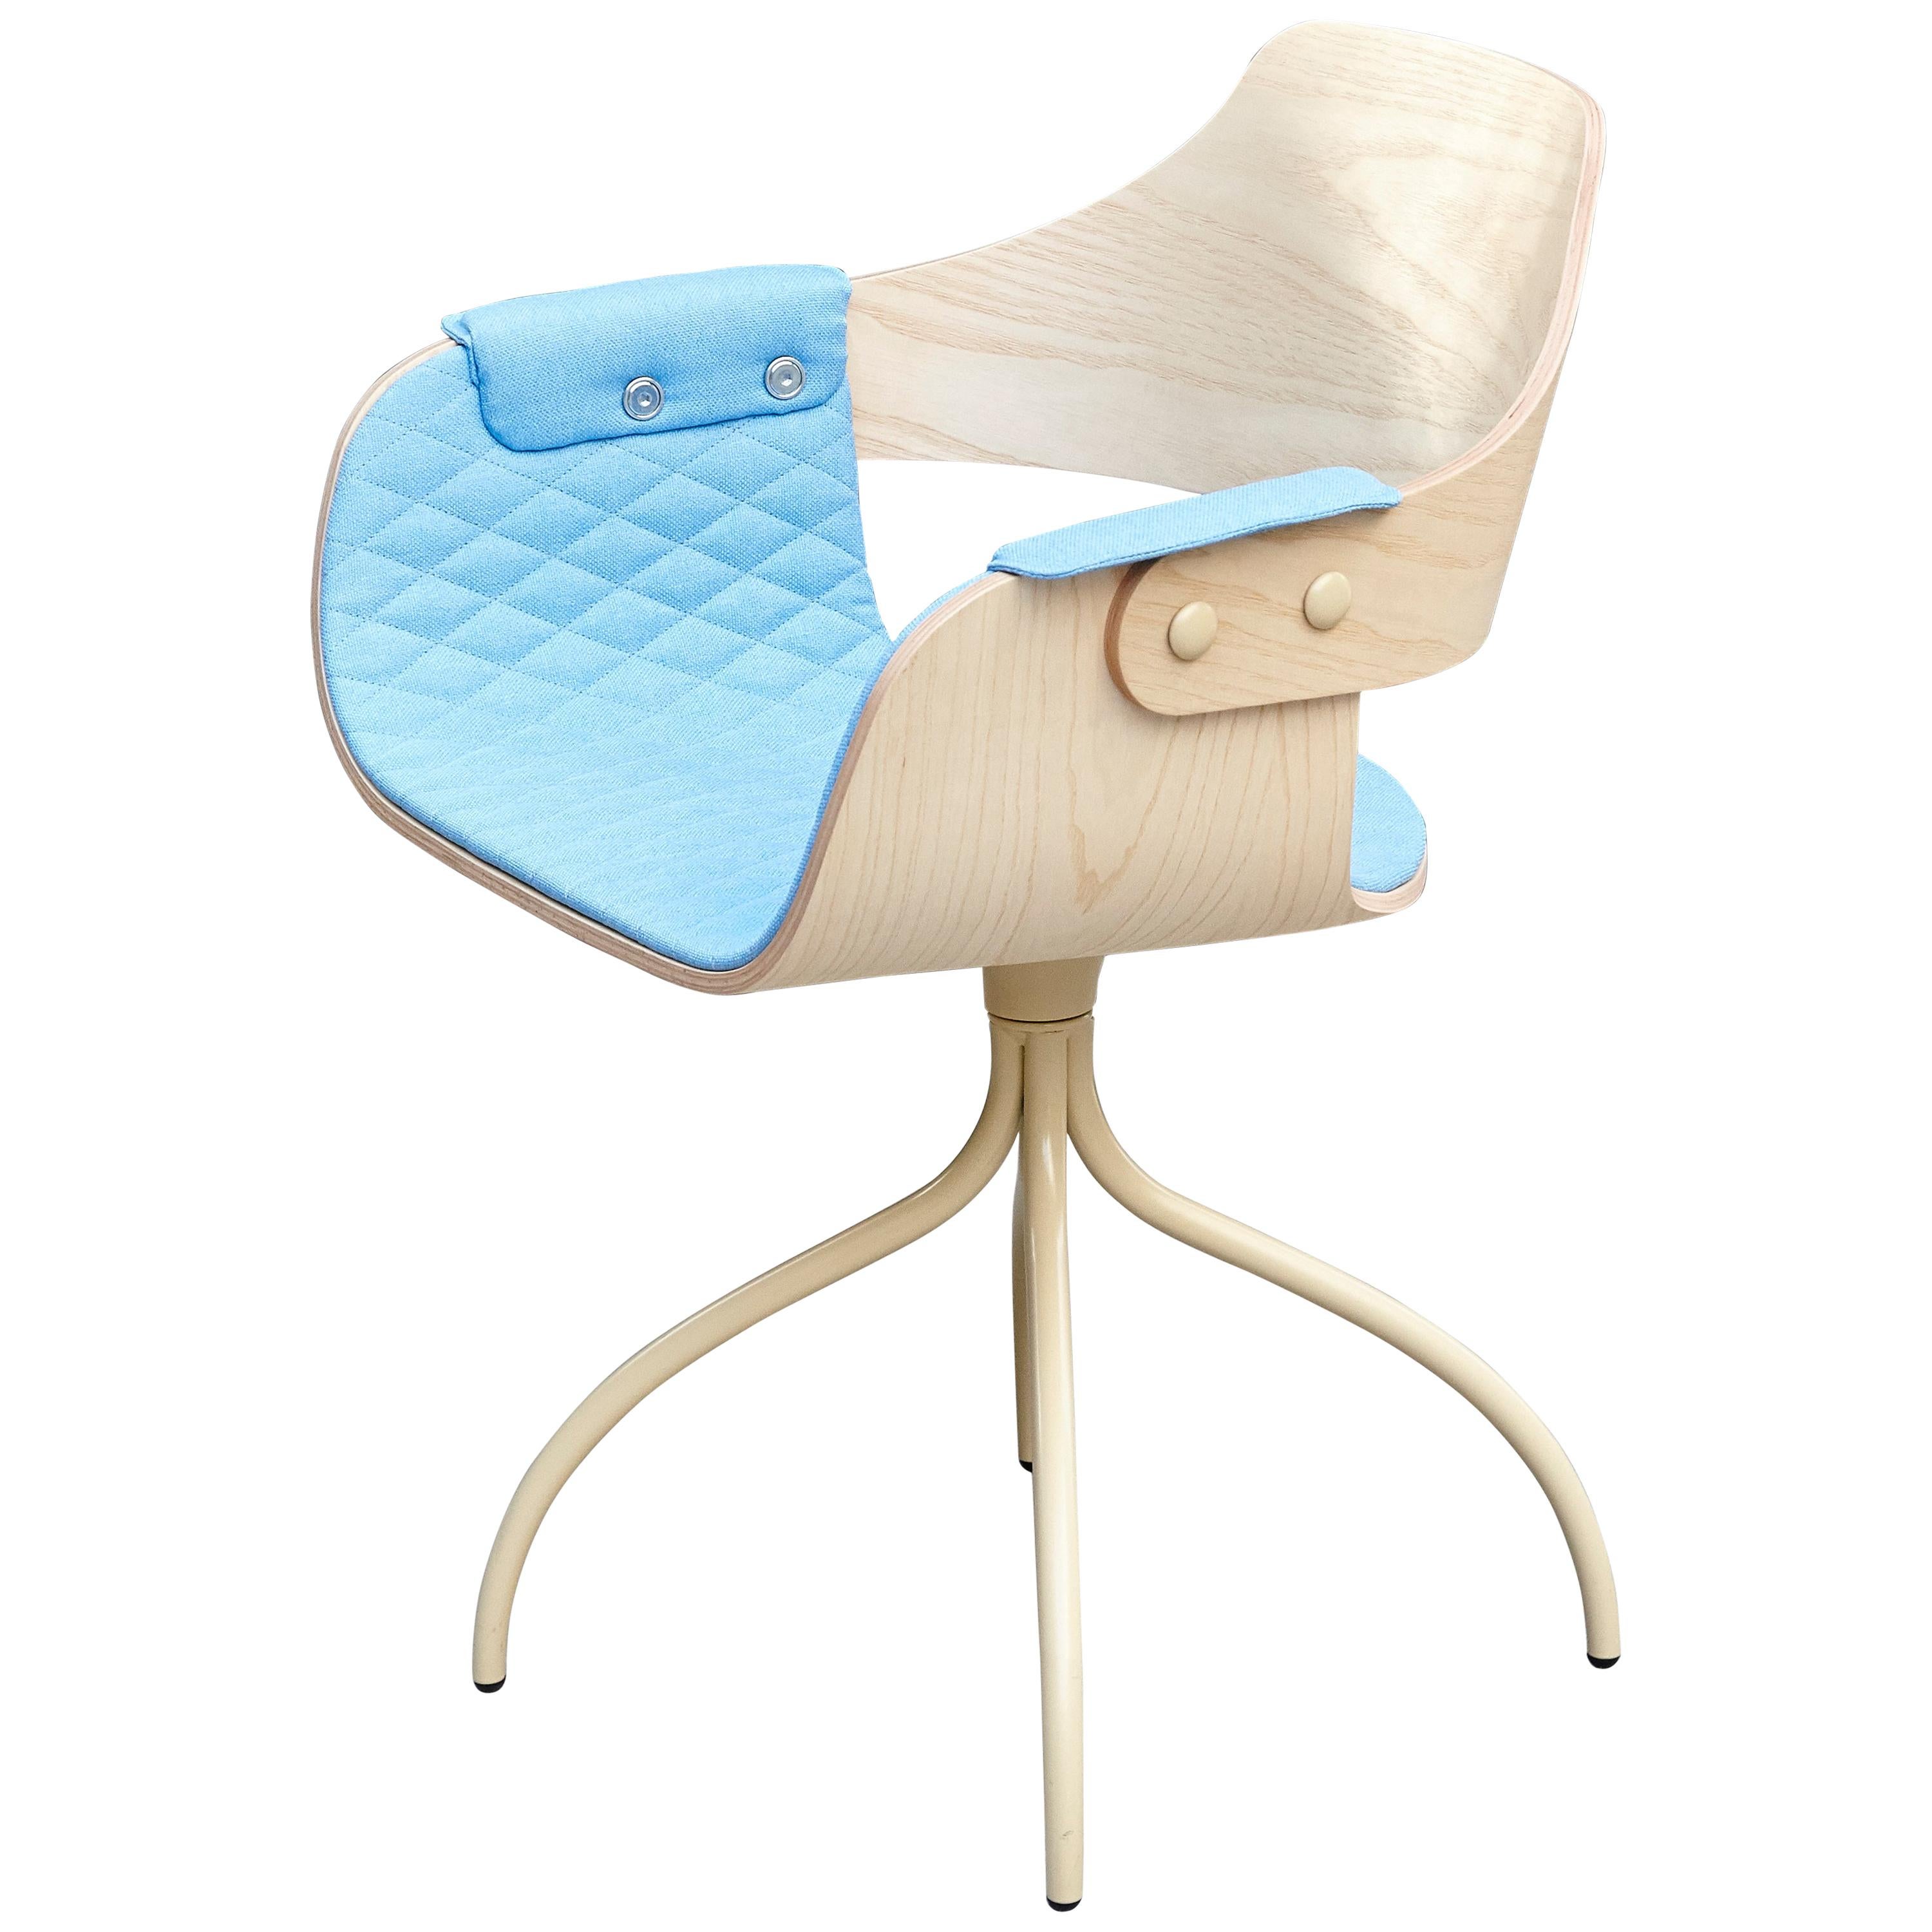 Jaime Hayon, Contemporary Upholstered Blue Wood Chair Showtime by BD Barcelona